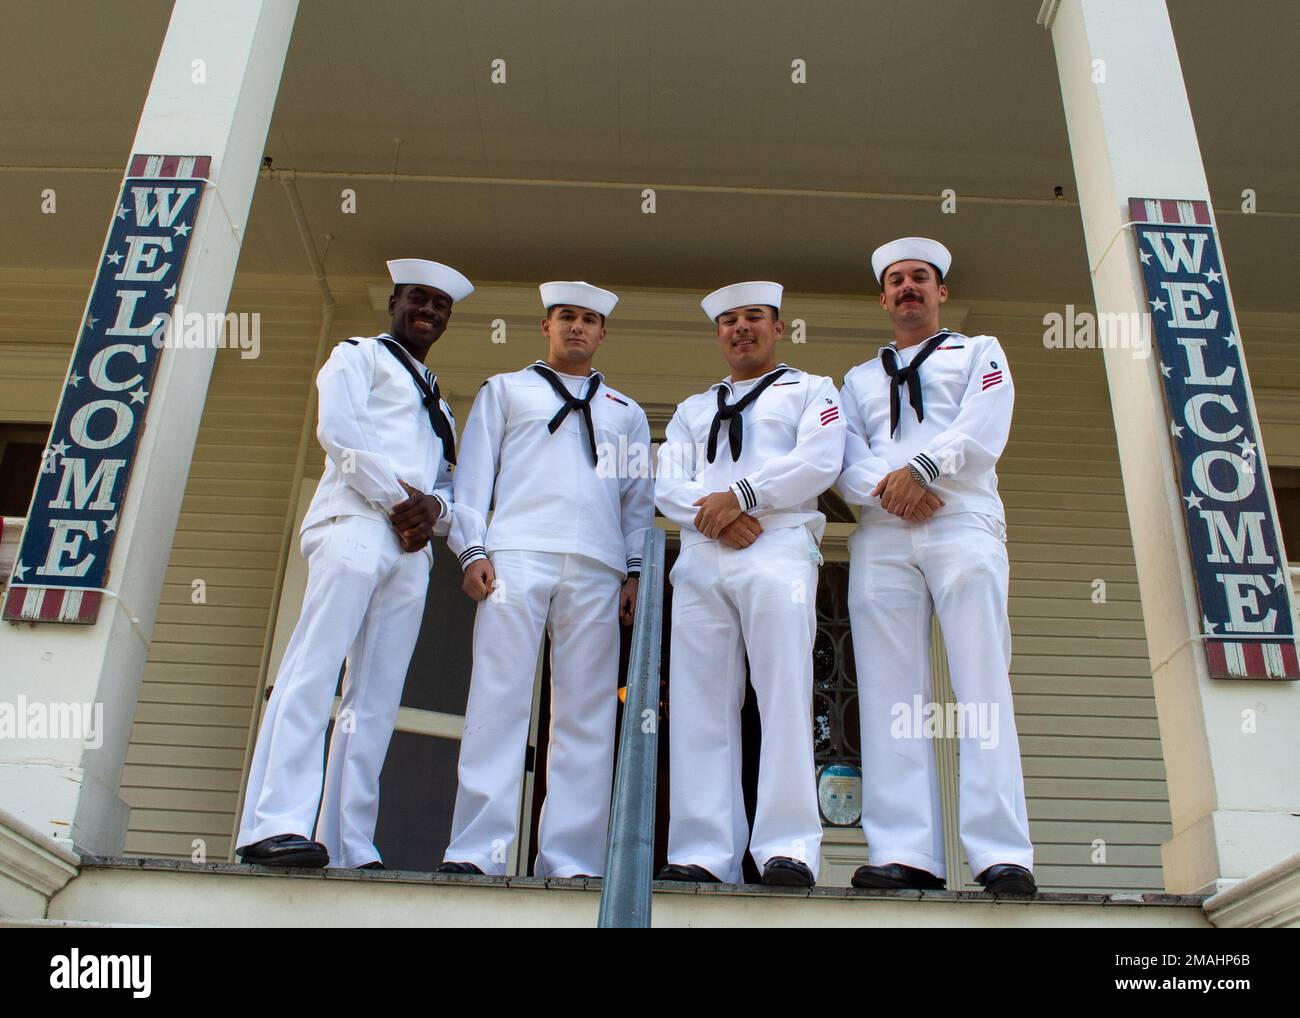 Wilmington, Calif. (May 27, 2022) - Sailors, assigned to Assault Craft Unit (ACU) 1, pose for a photograph in front of the Banning Museum located in Wilmington, Calif. for a Welcome Celebration during Los Angeles Fleet Week. LAFW is an opportunity for the American public to meet their Navy, Marine Corps and Coast Guard teams and experience America's sea services. During fleet week, service members participate in various community service events, showcase capabilities and equipment to the community, and enjoy the hospitality of Los Angeles and its surrounding areas. Stock Photo